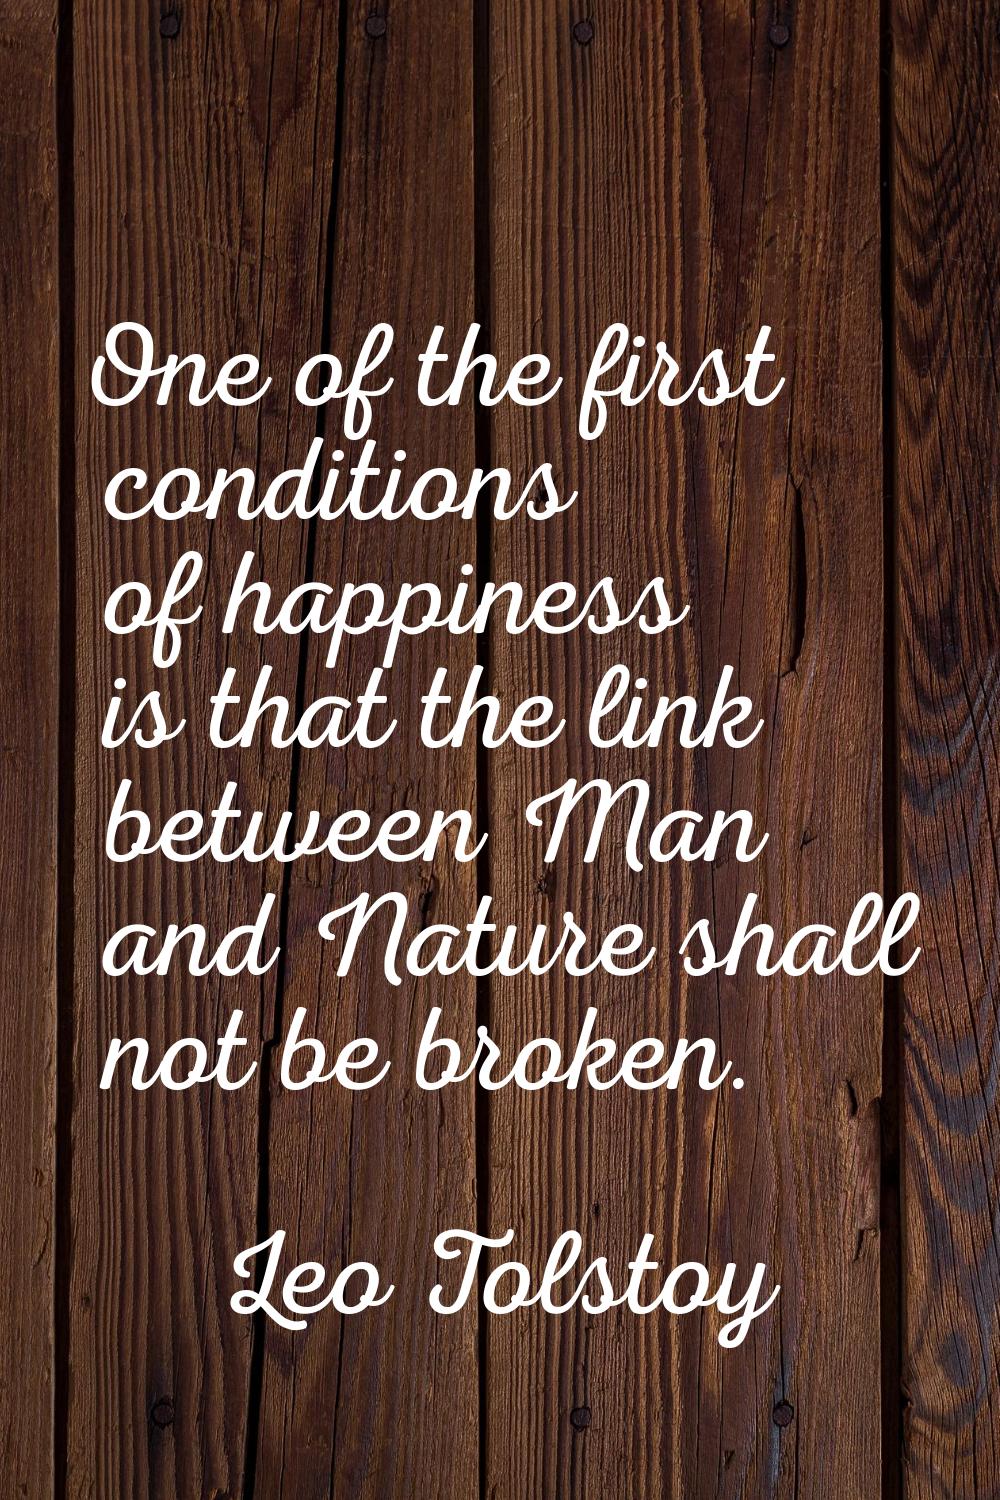 One of the first conditions of happiness is that the link between Man and Nature shall not be broke